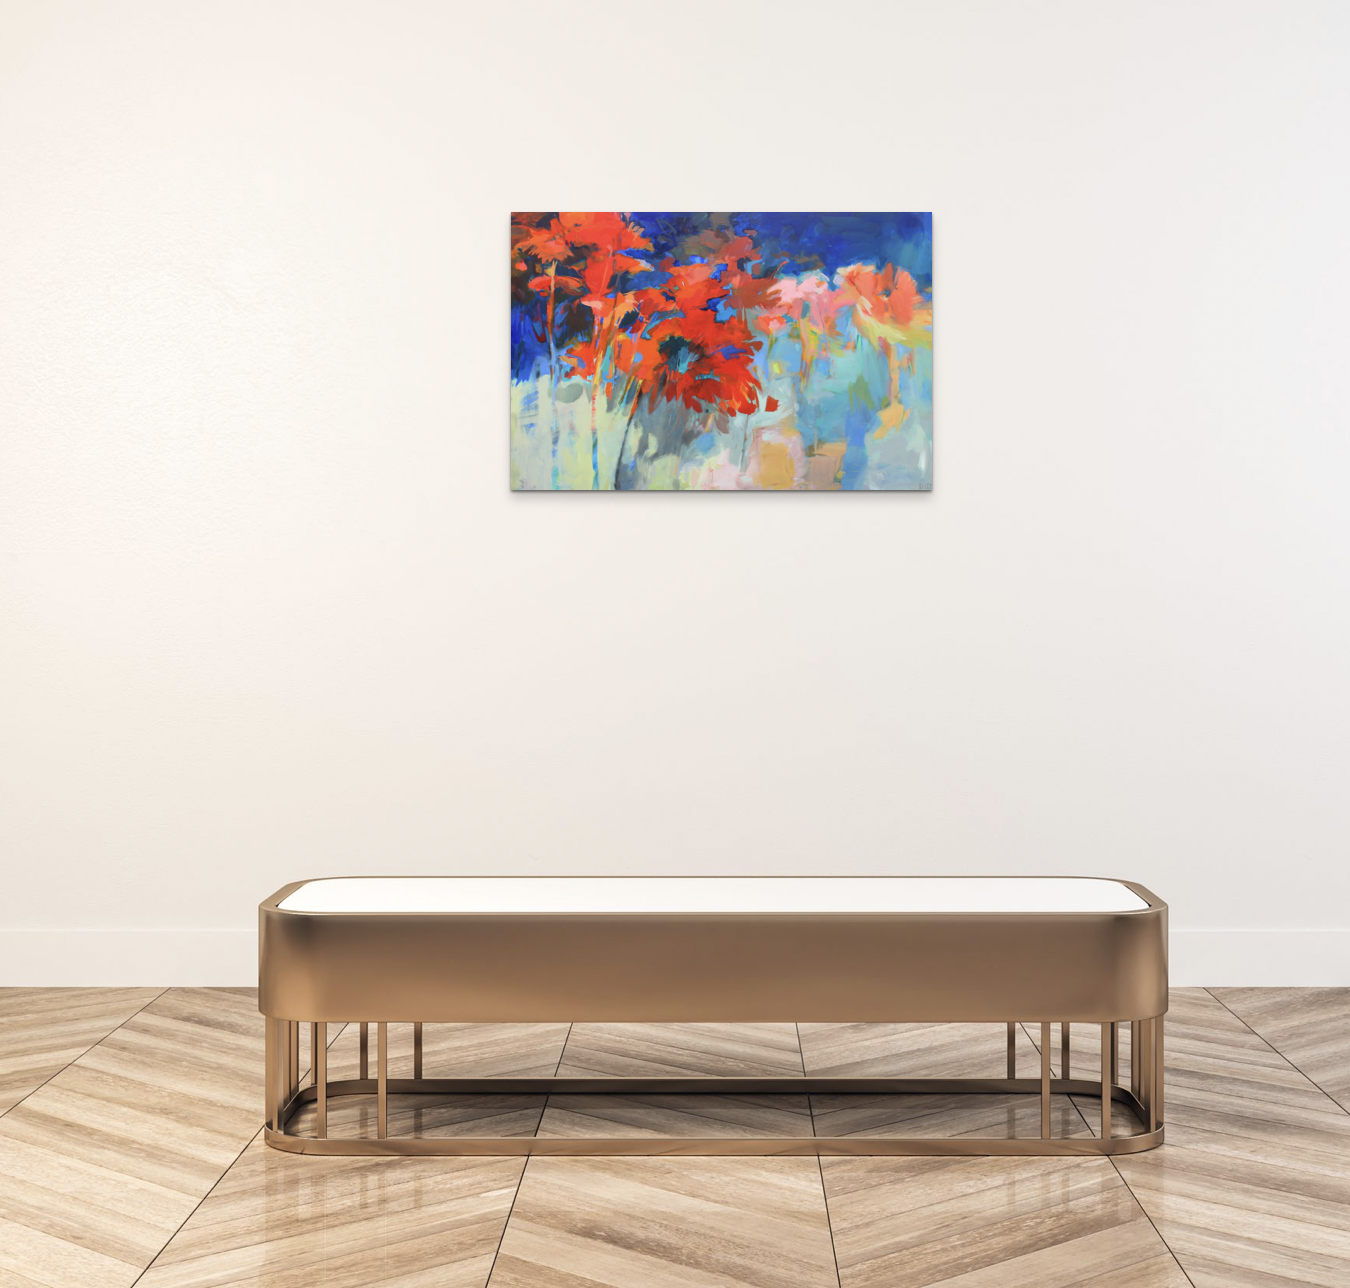 Like a Flower in a Field, acrylic floral painting by Becky Holuk | Effusion Art Gallery + Cast Glass Studio, Invermere BC